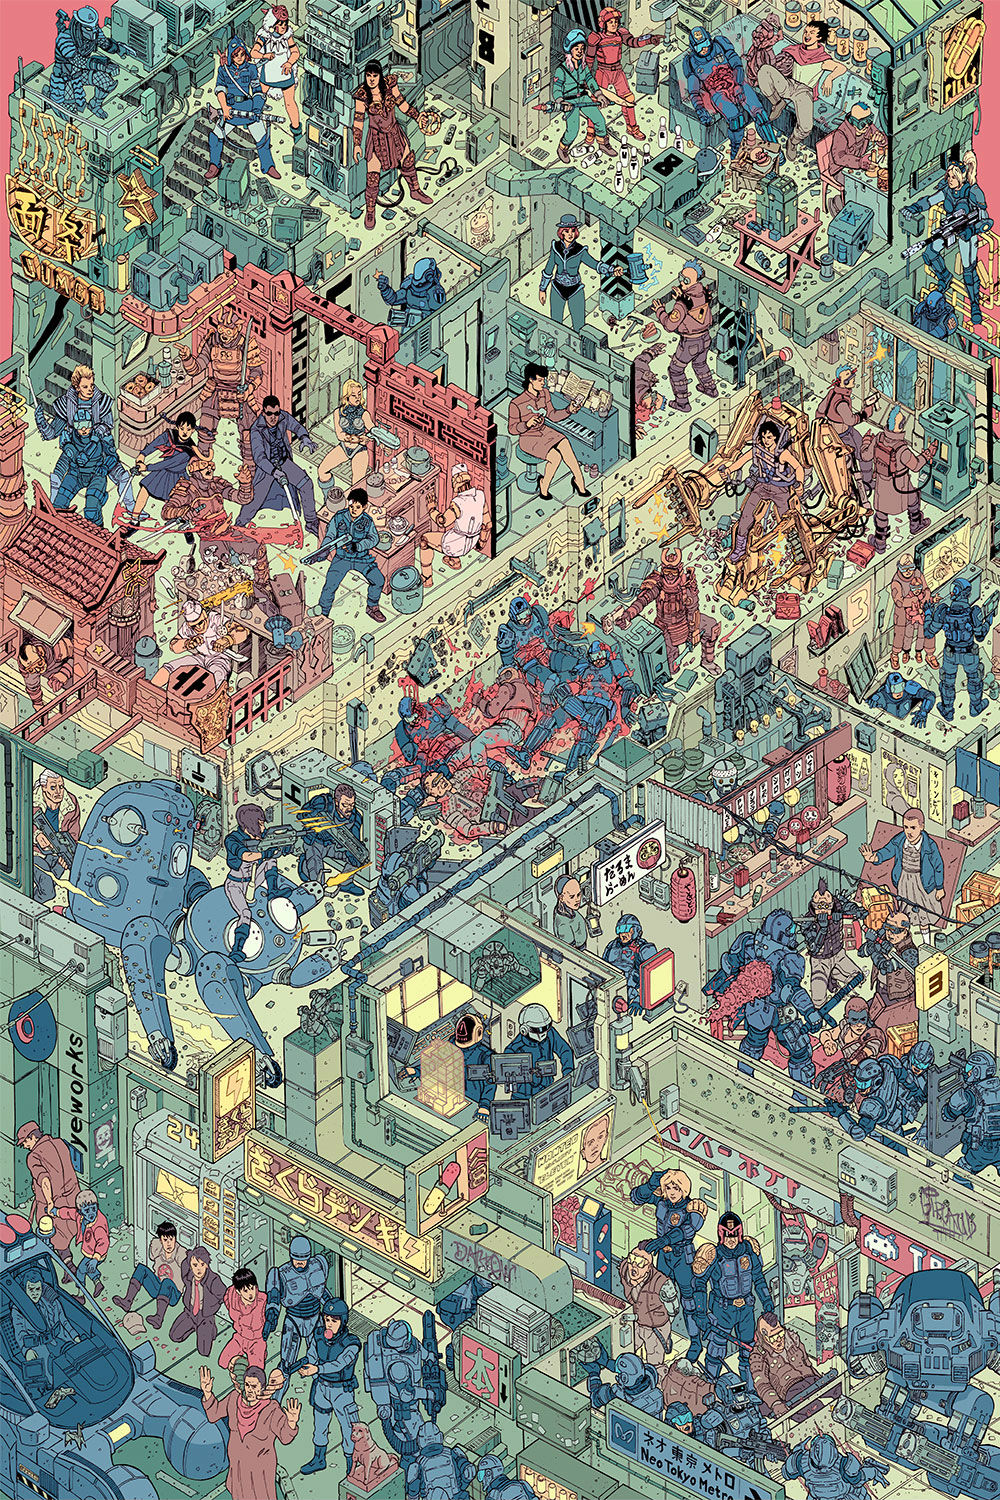 Can You Pick Out All The References In This Action-Packed Sci-Fi Poster Mashup?